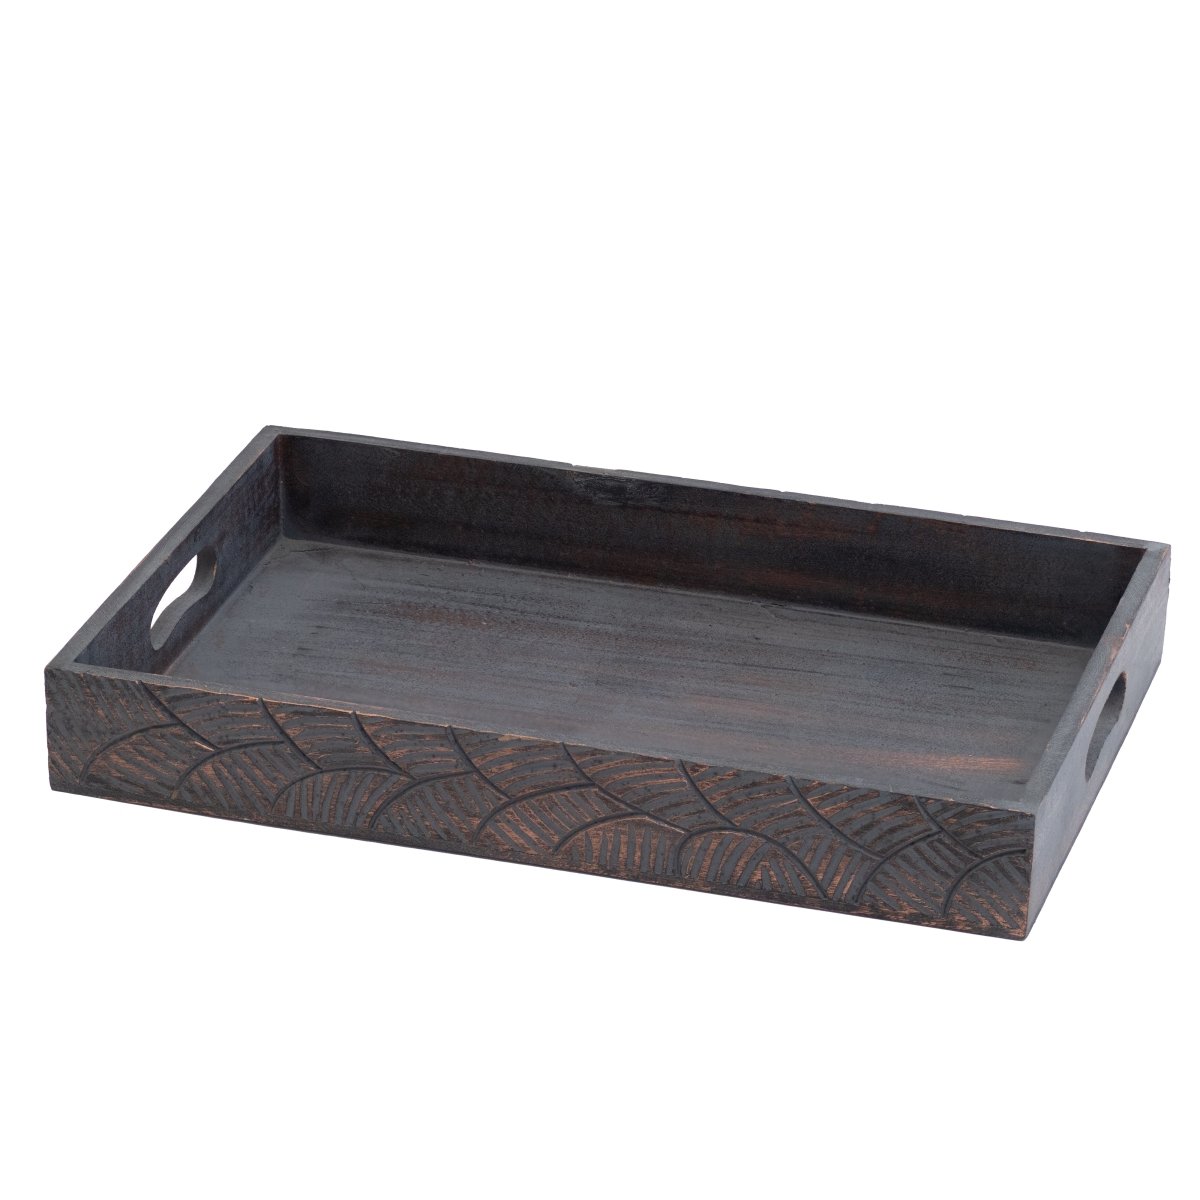 Kezevel Wooden Serving Tray - Brown and Copper Rectangle Handcrafted Tray for Home Decor, Dinning Table Tray, Tea Coffee Tray